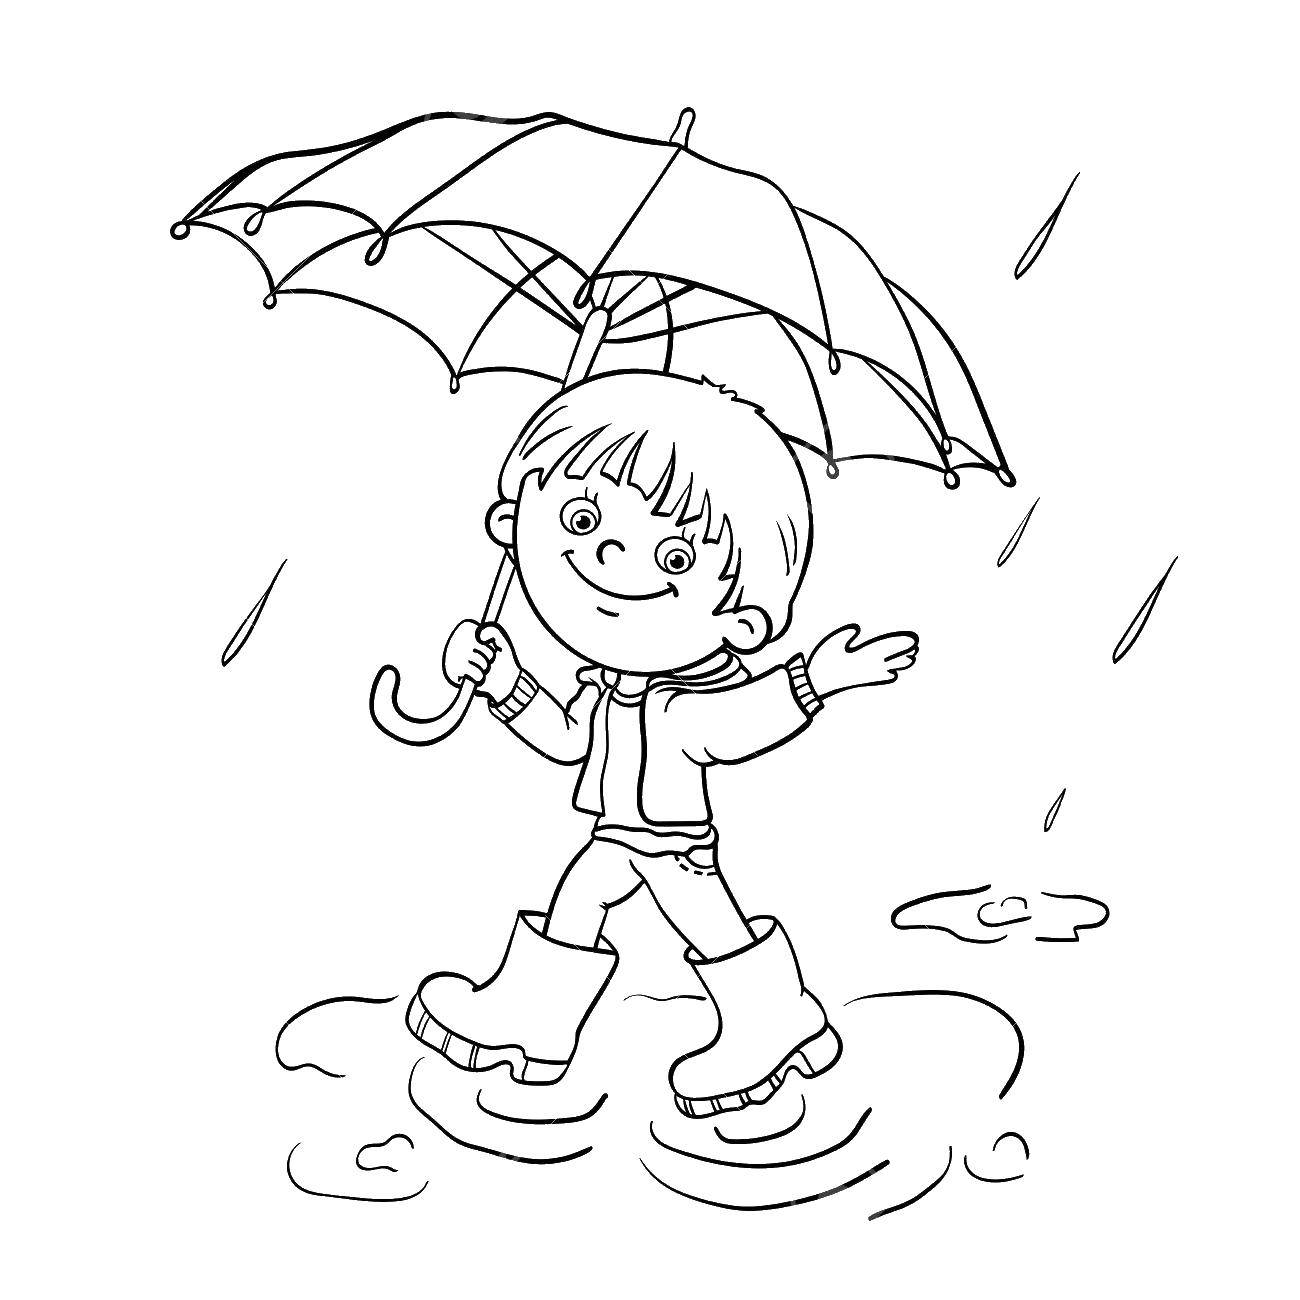 Coloring Boy in boots with umbrella. Category the contour of the boy. Tags:  boy, umbrella.